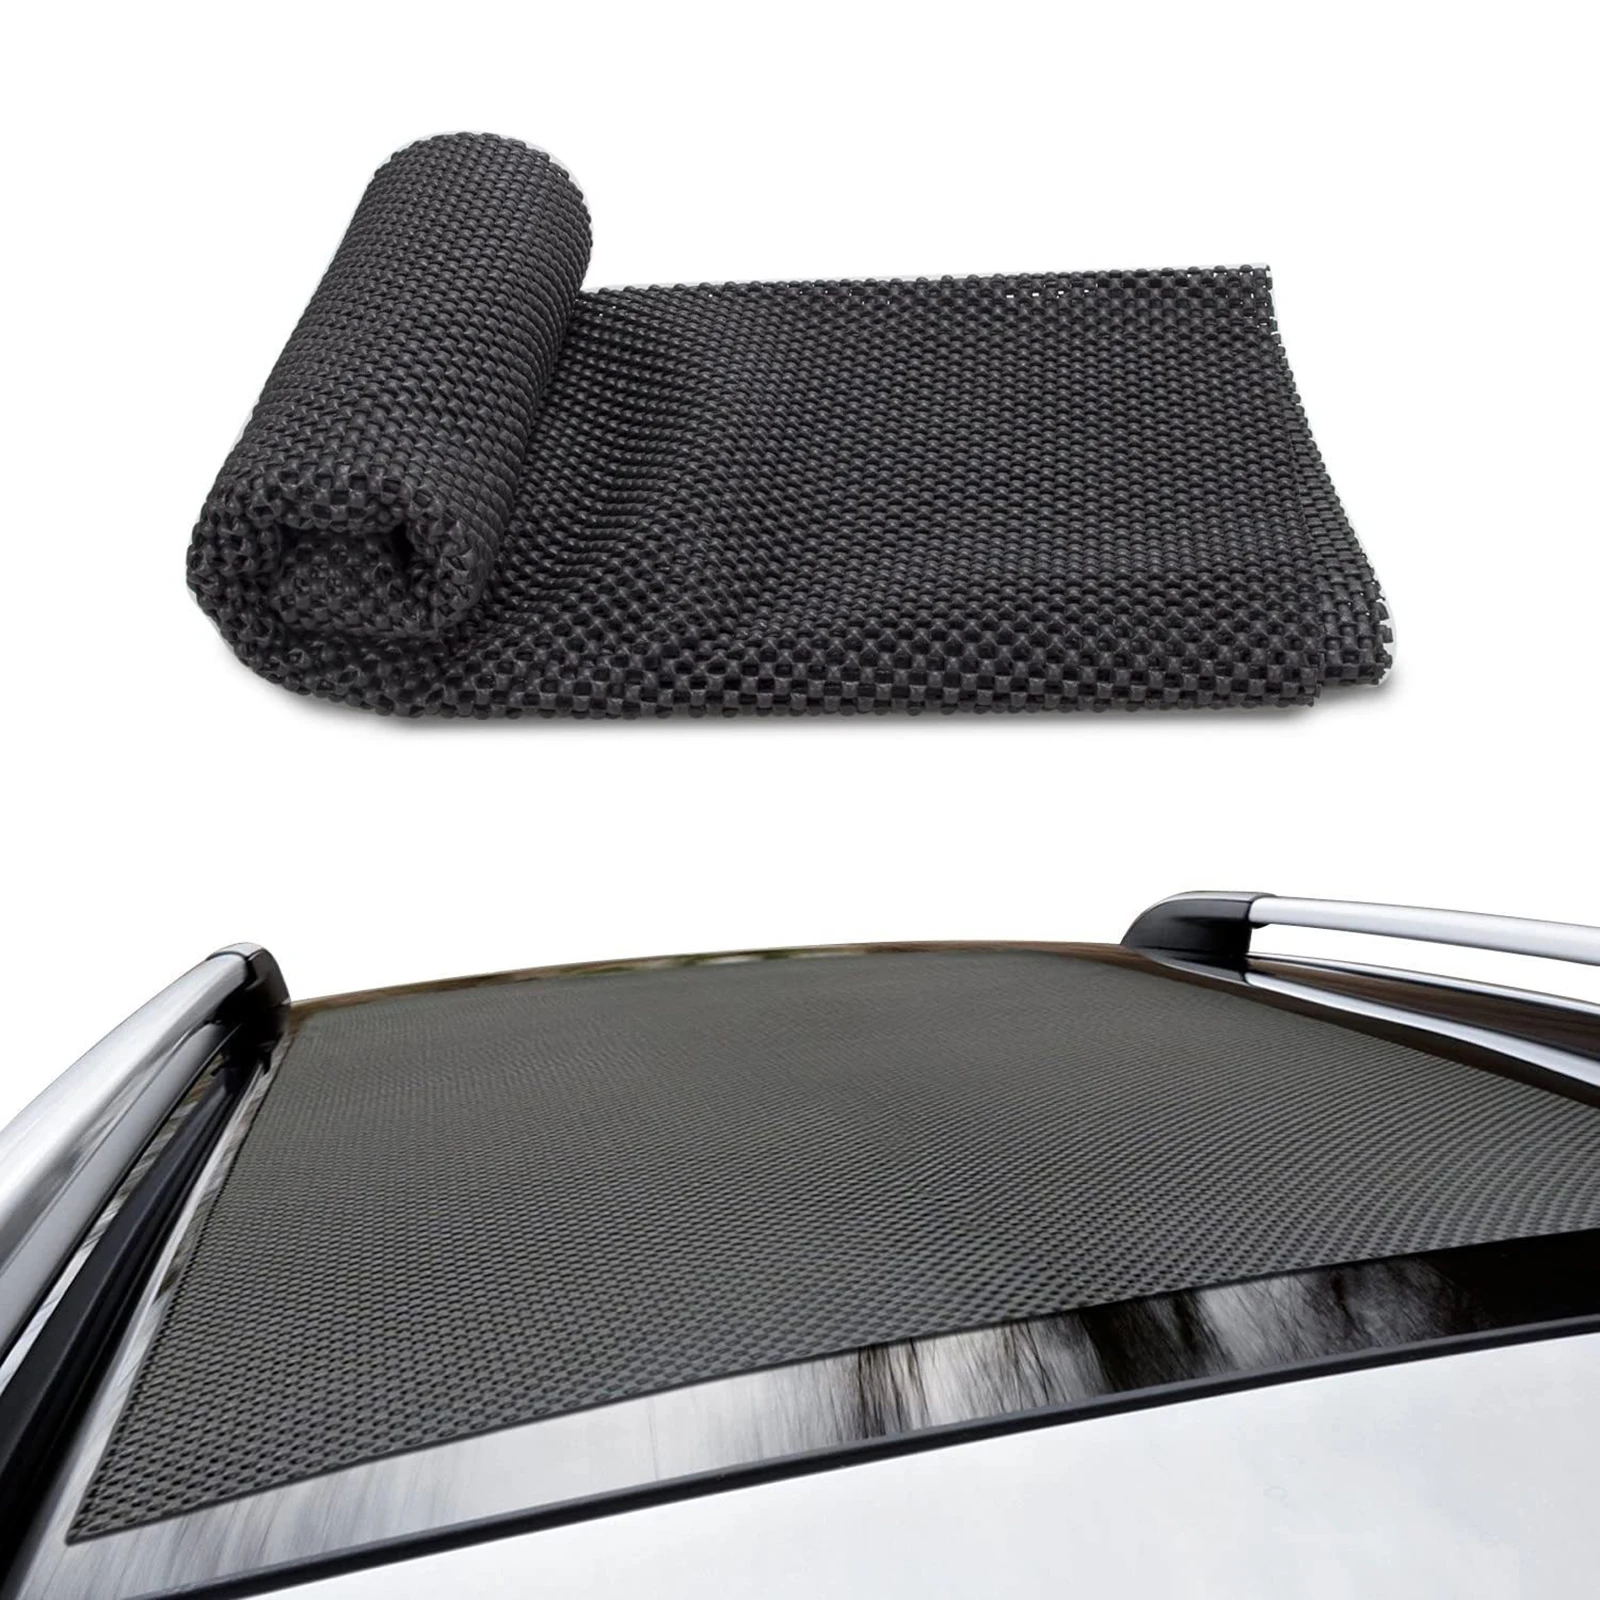 Waterproof, 420D Oxford Cloth ,Cargo Luggage Storage Carrier Bag and Mat for Car Van Foldable